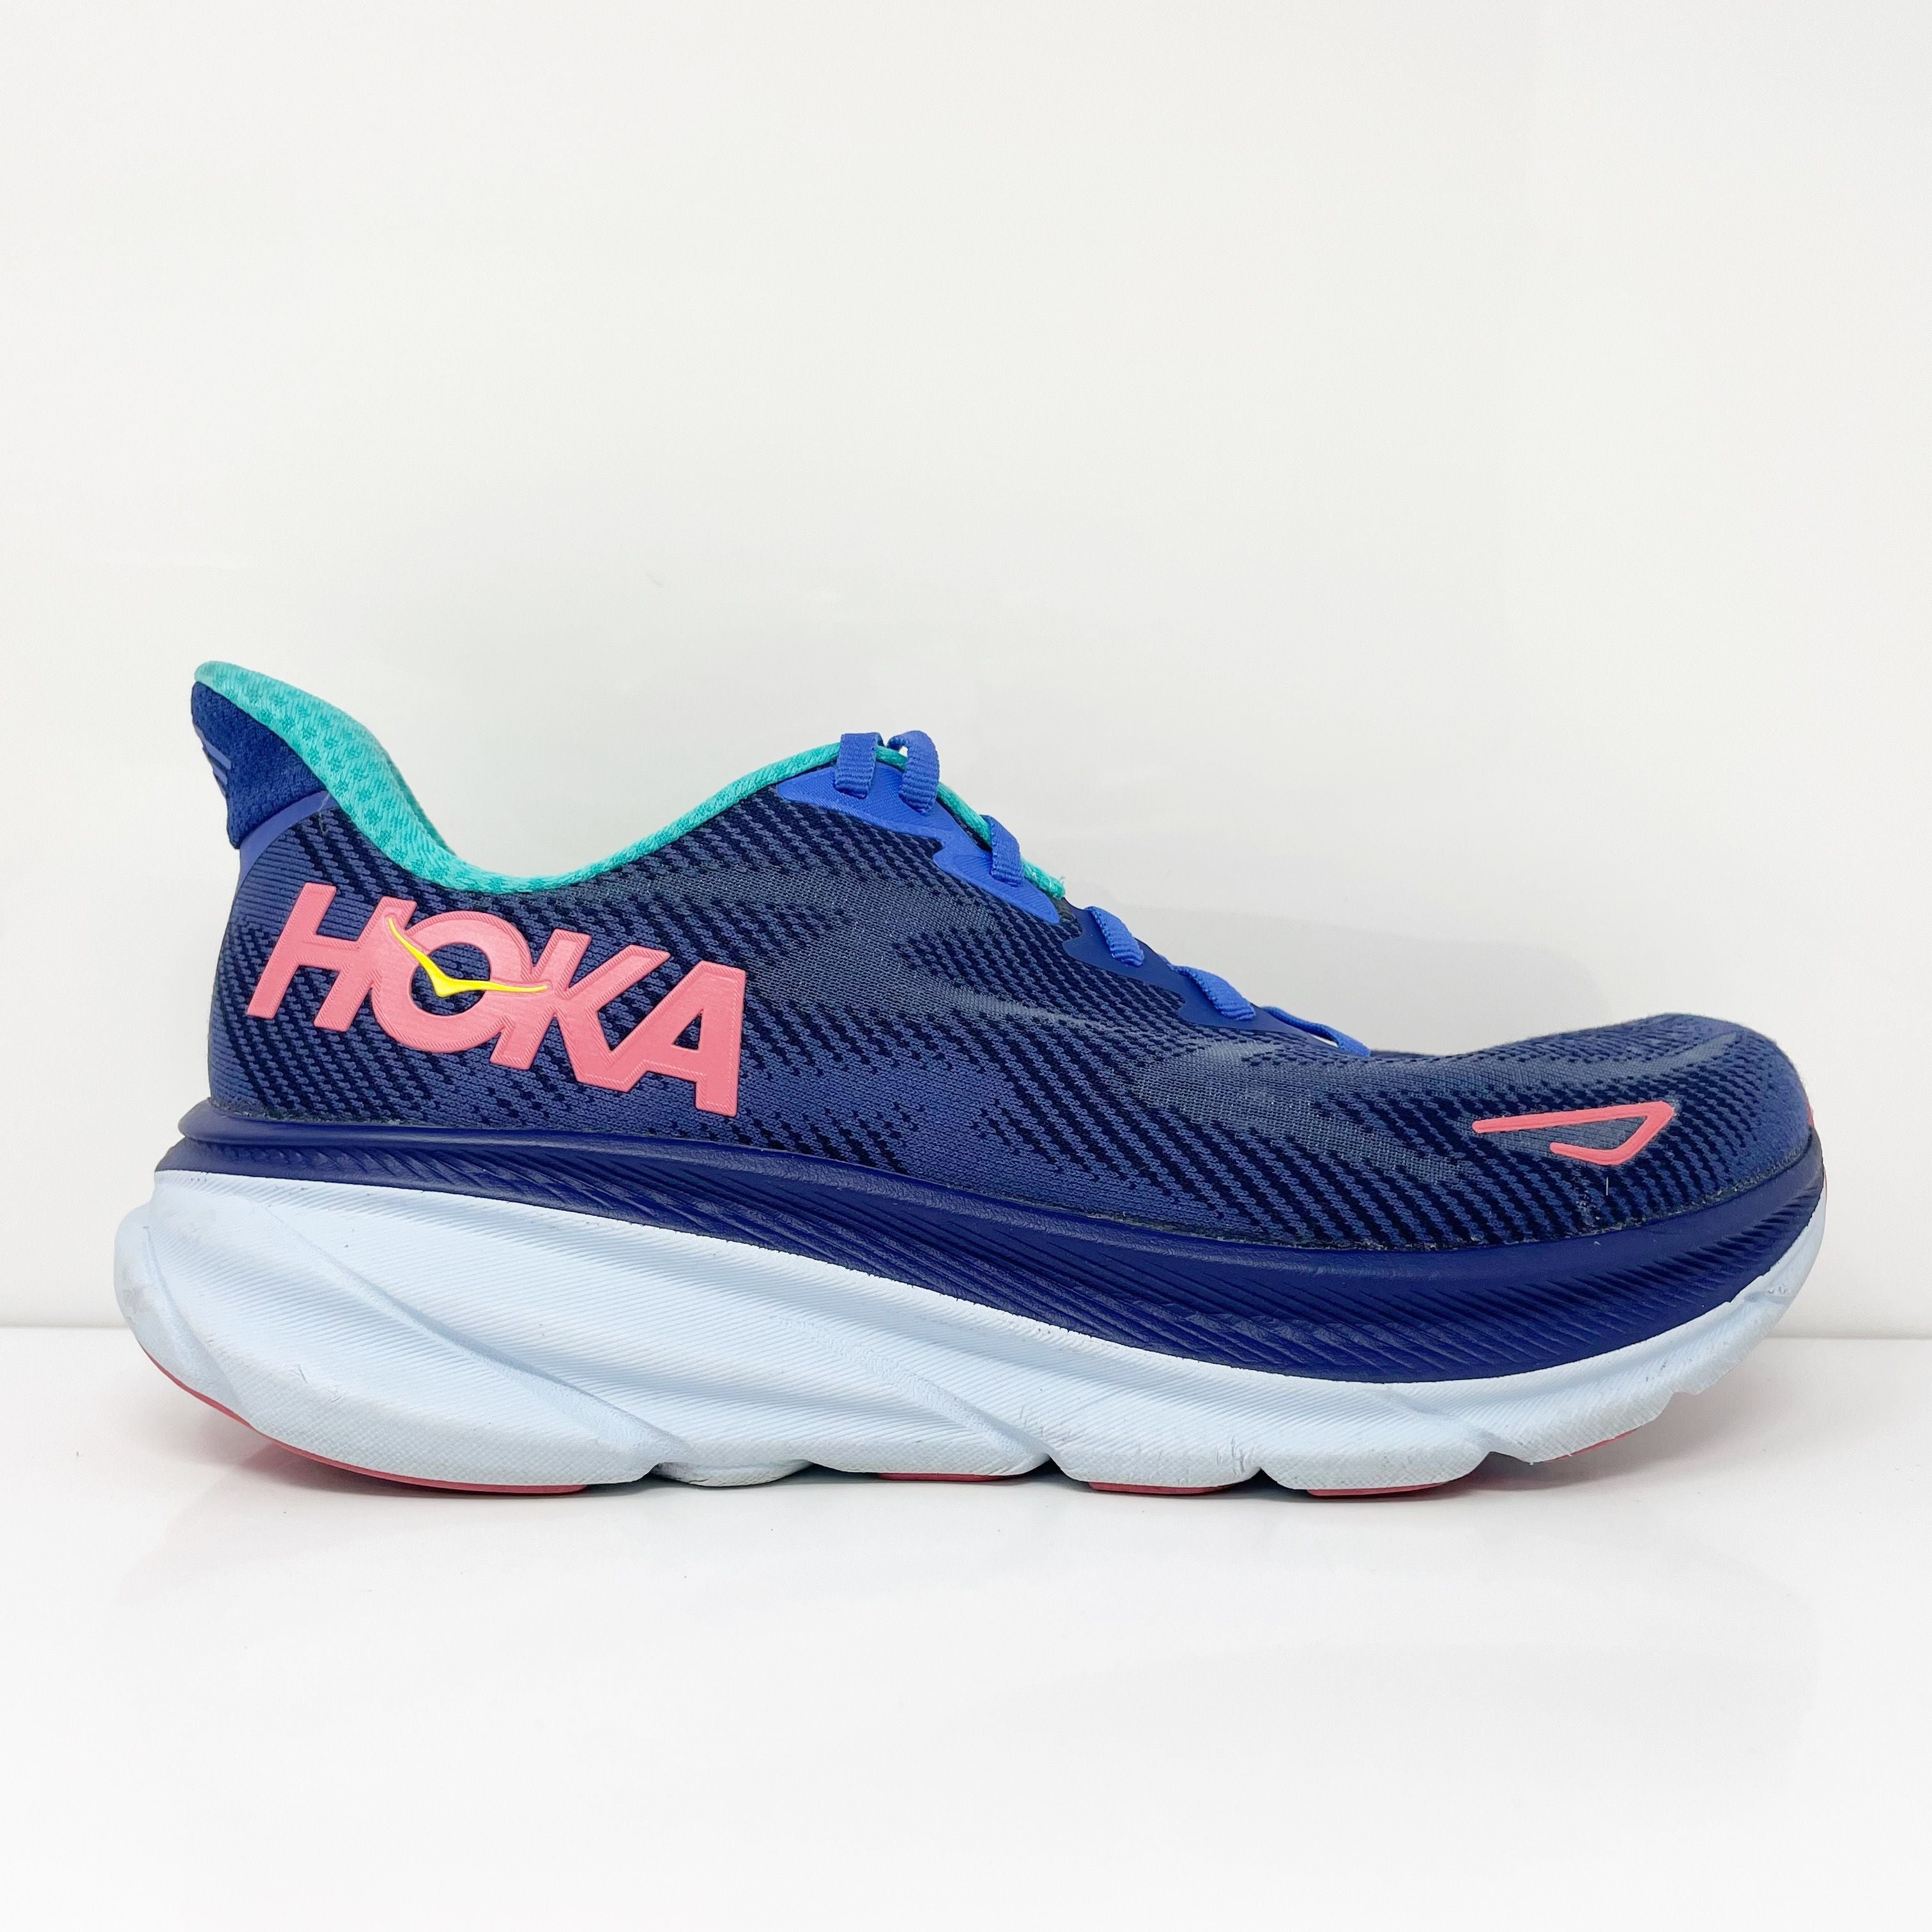 Hoka One One Womens Clifton 9 1127896 BBCRM Blue Running Shoes Sneaker ...